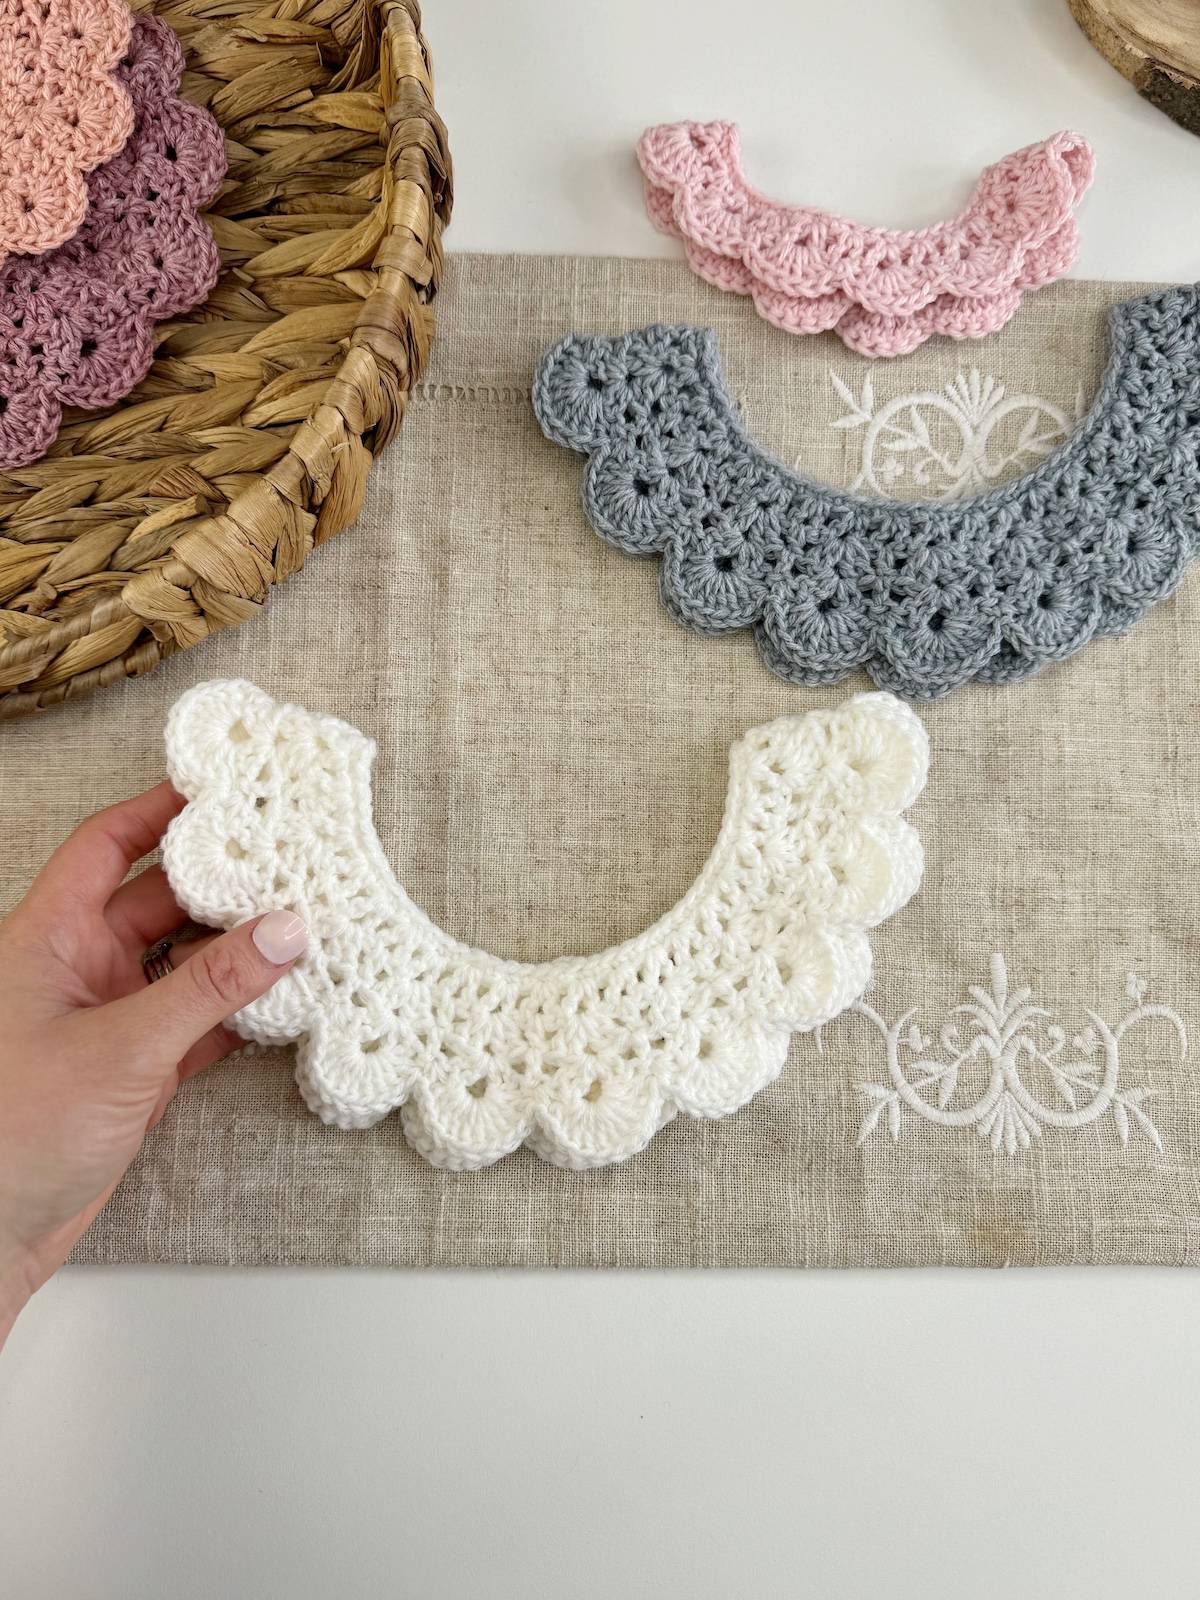 Two crocheted collars on a table.